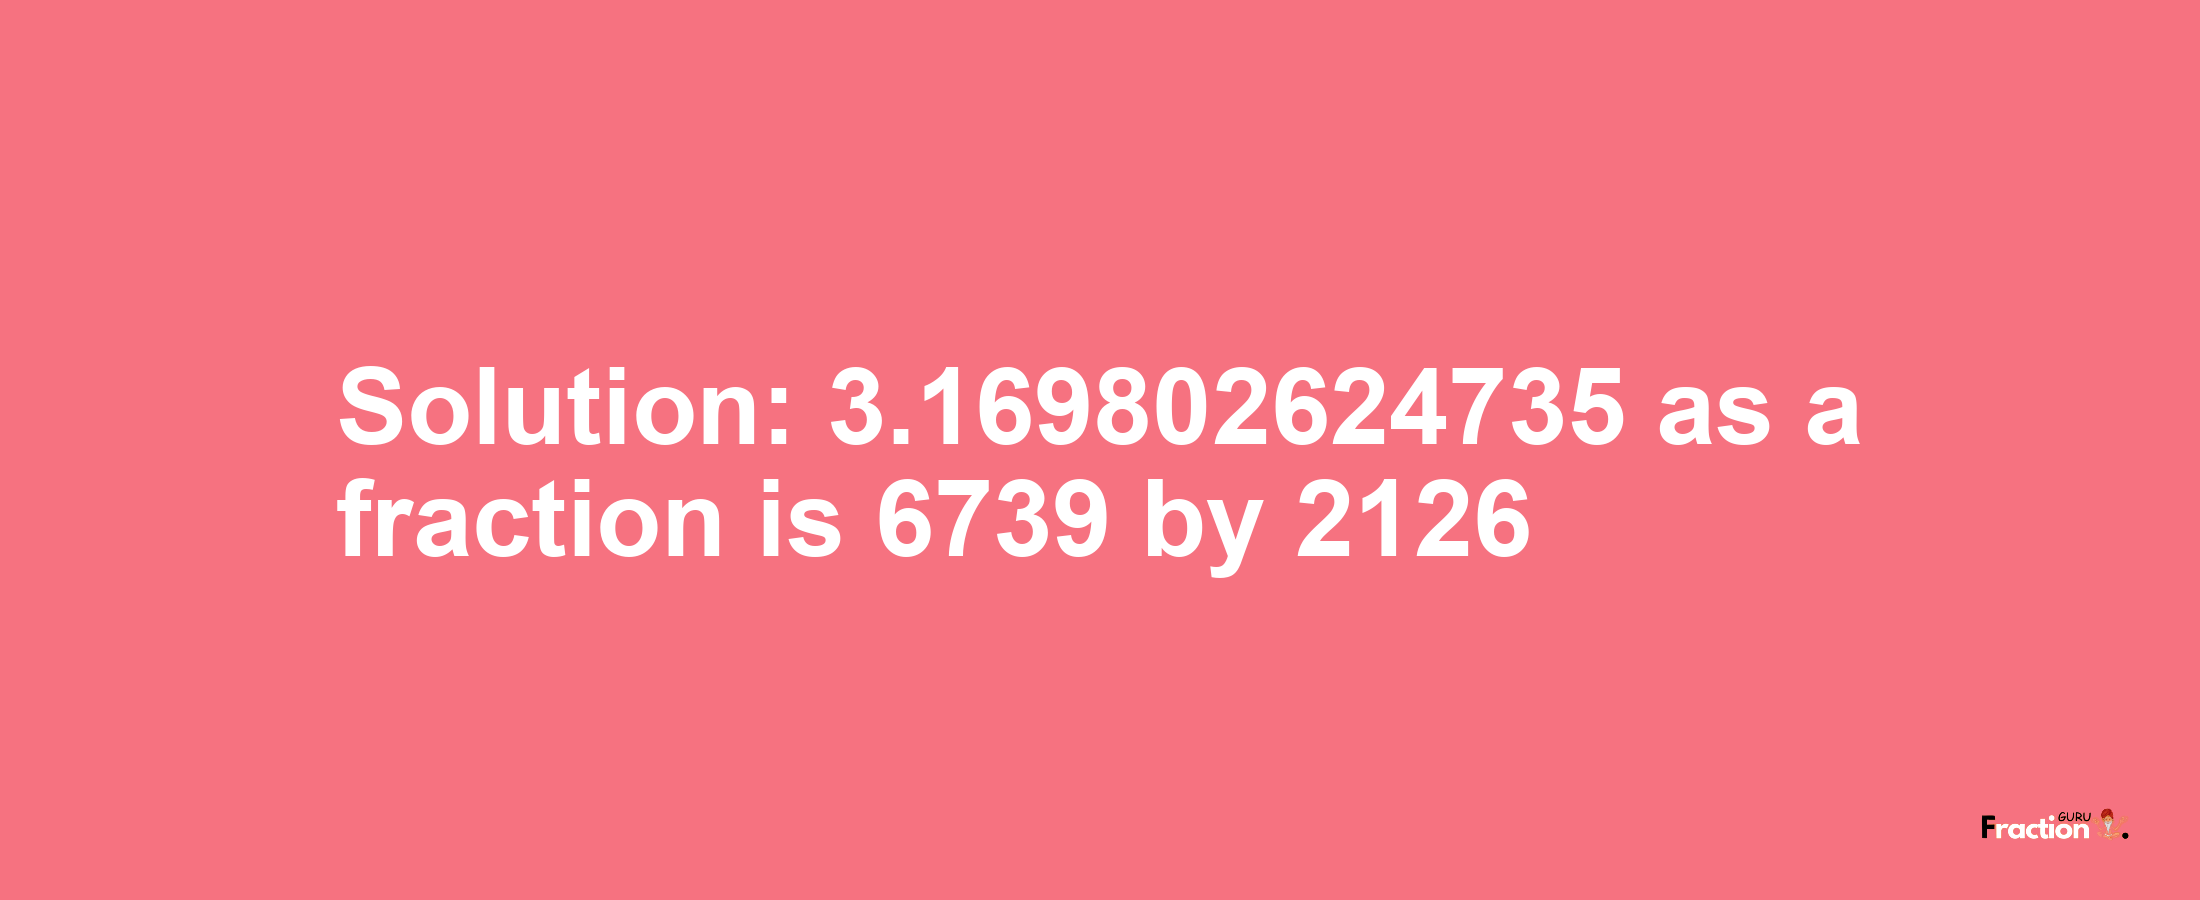 Solution:3.169802624735 as a fraction is 6739/2126